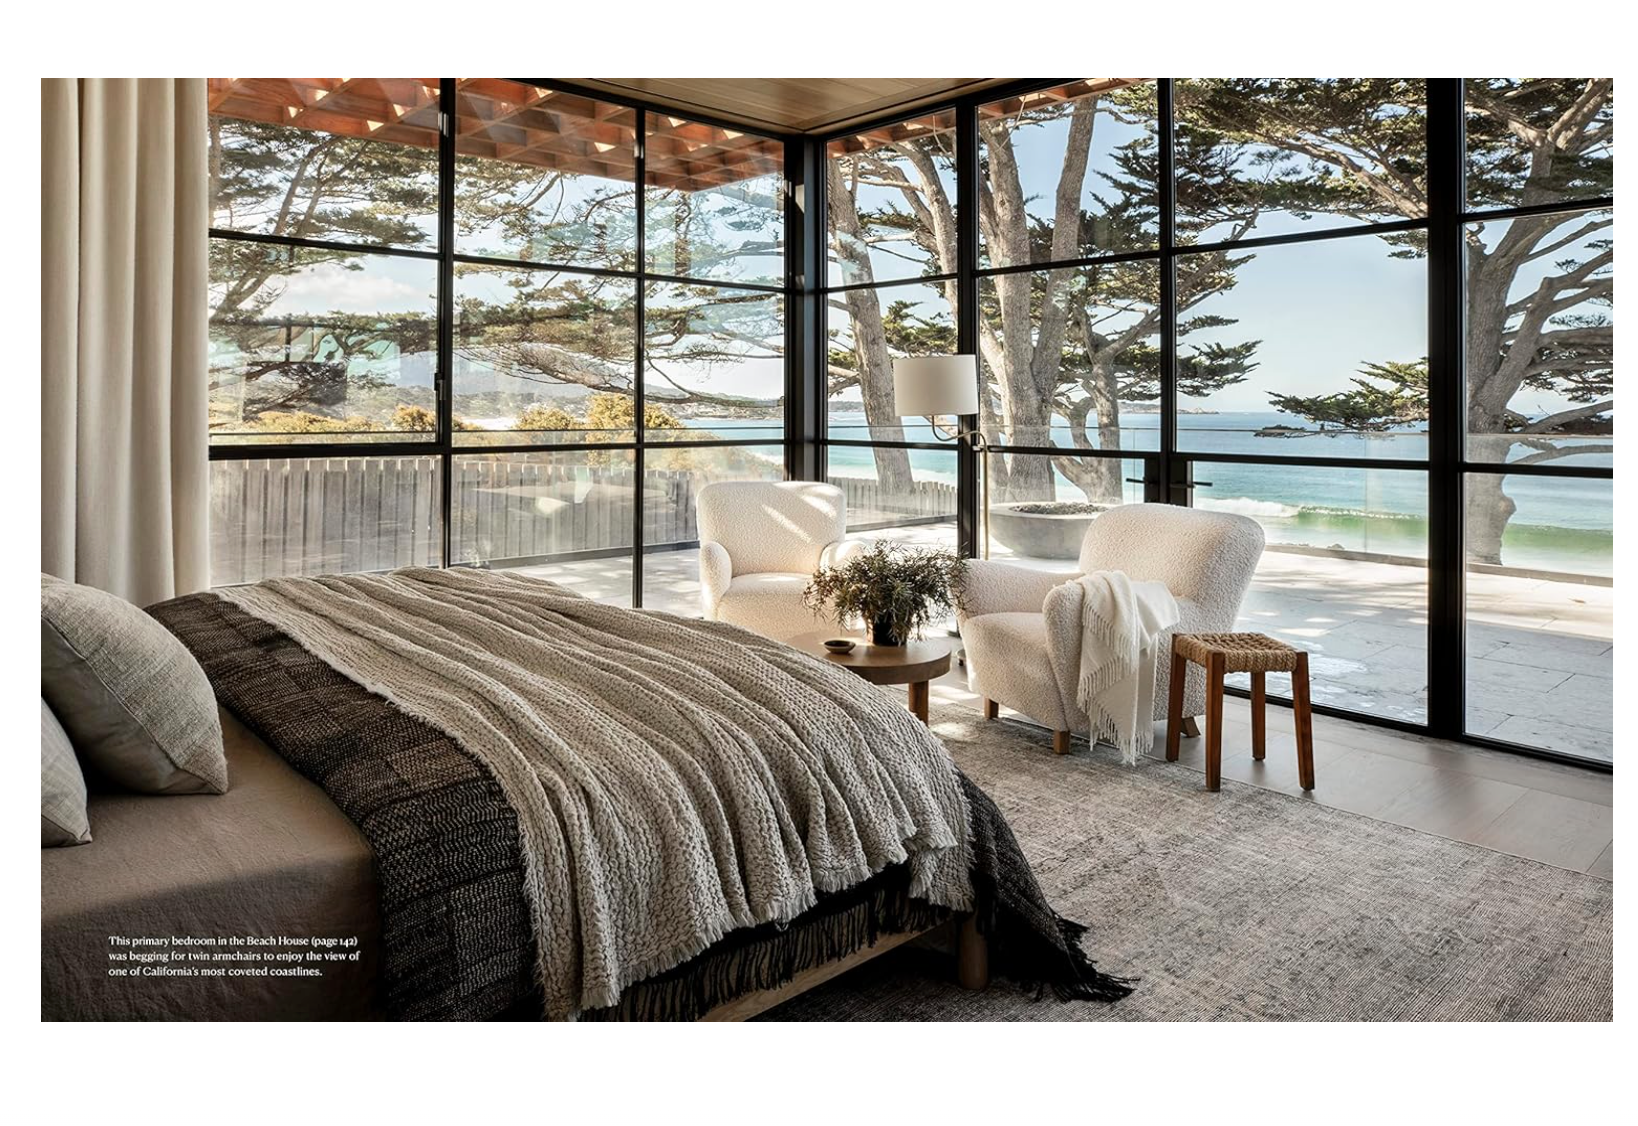 A serene bedroom in a bungalow with large windows overlooking a beach, featuring a cozy bed with a gray blanket, a plush armchair, and a small table with a vase and books. A floor lamp stands in the corner, all from Random House's "Call It Home: The Details That Matter.